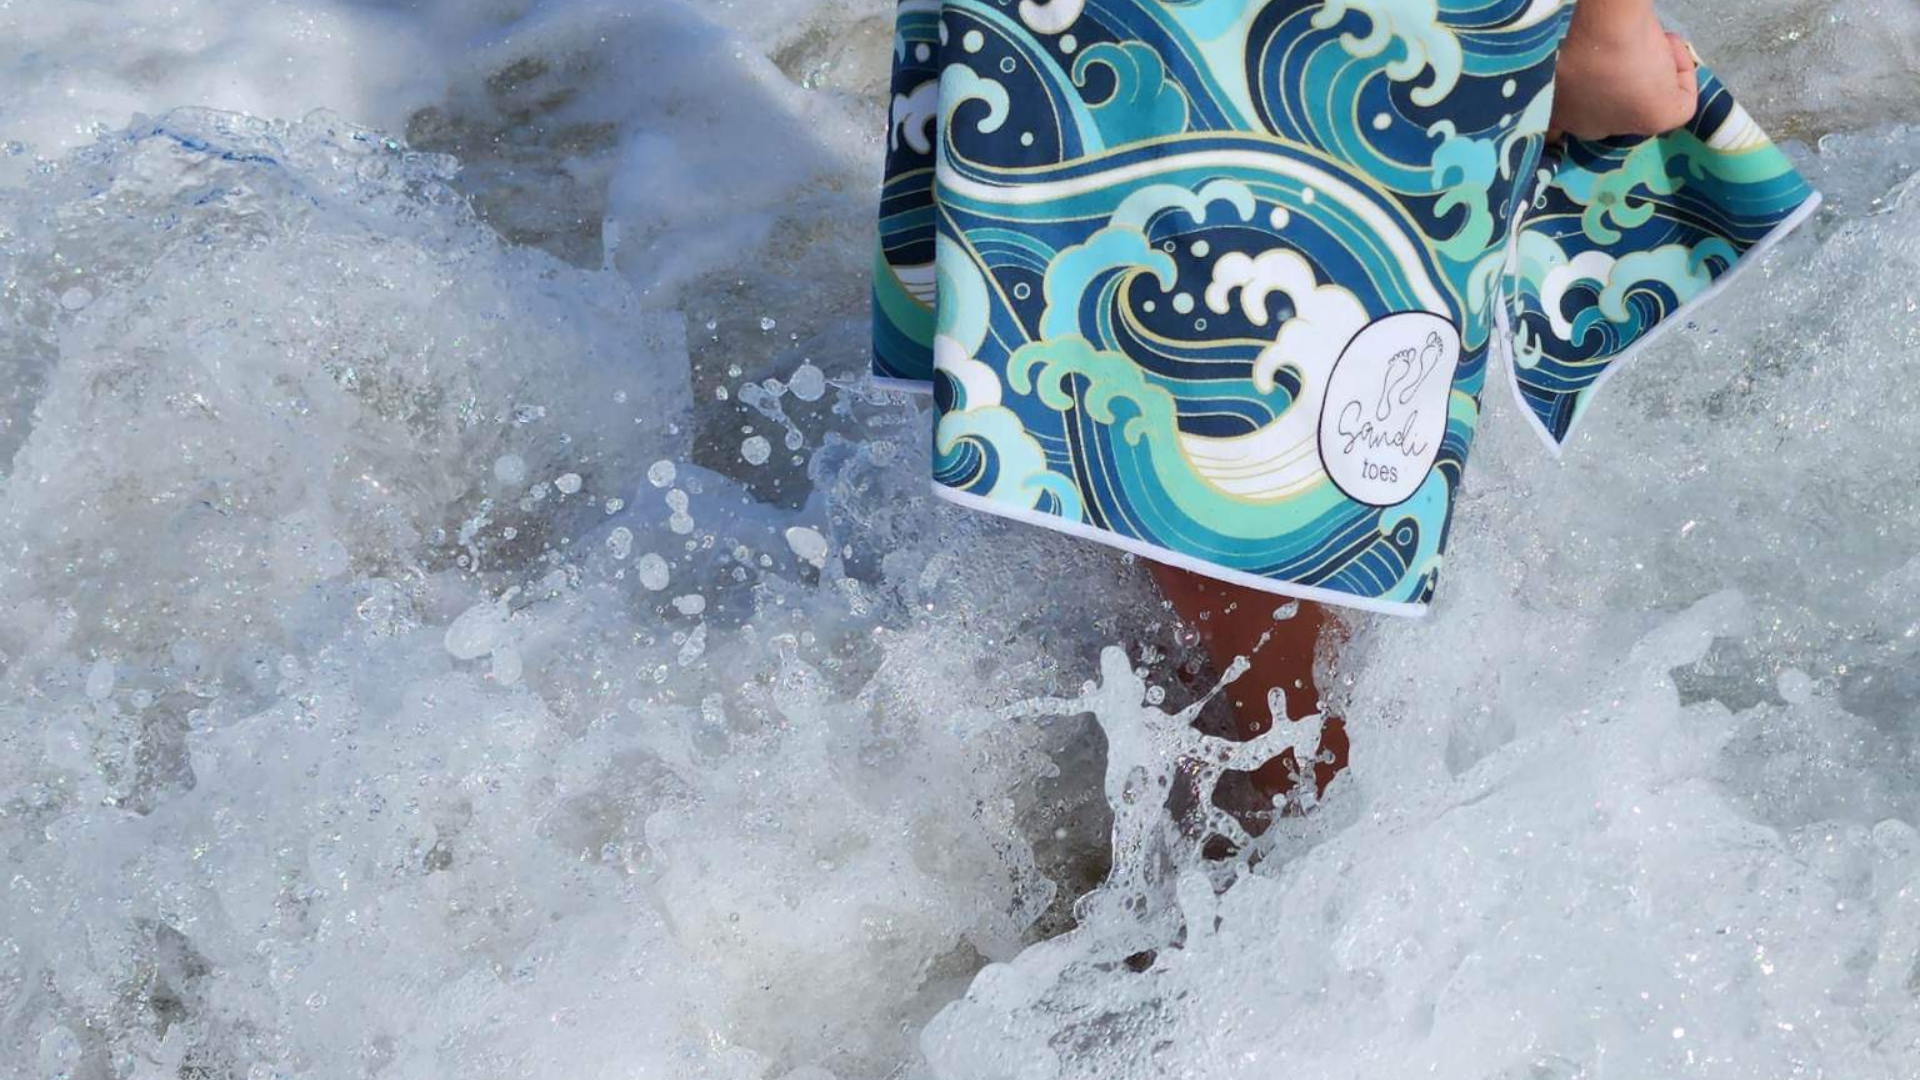 "Dive into the swirling foaming waves with Sandi Toes' 'Wipeout' Sand-Free Hooded Beach Towel! This captivating image showcases the Wipeout design – tropical waves that captivate the essence of beach adventures. Featuring the Sandi Toes logo on the towel, the foaming ocean waves swirl around a boy's foot, creating a picturesque scene. Wipeout is now available in Small, Medium, and Large sizes – your ideal companion for every adventure!